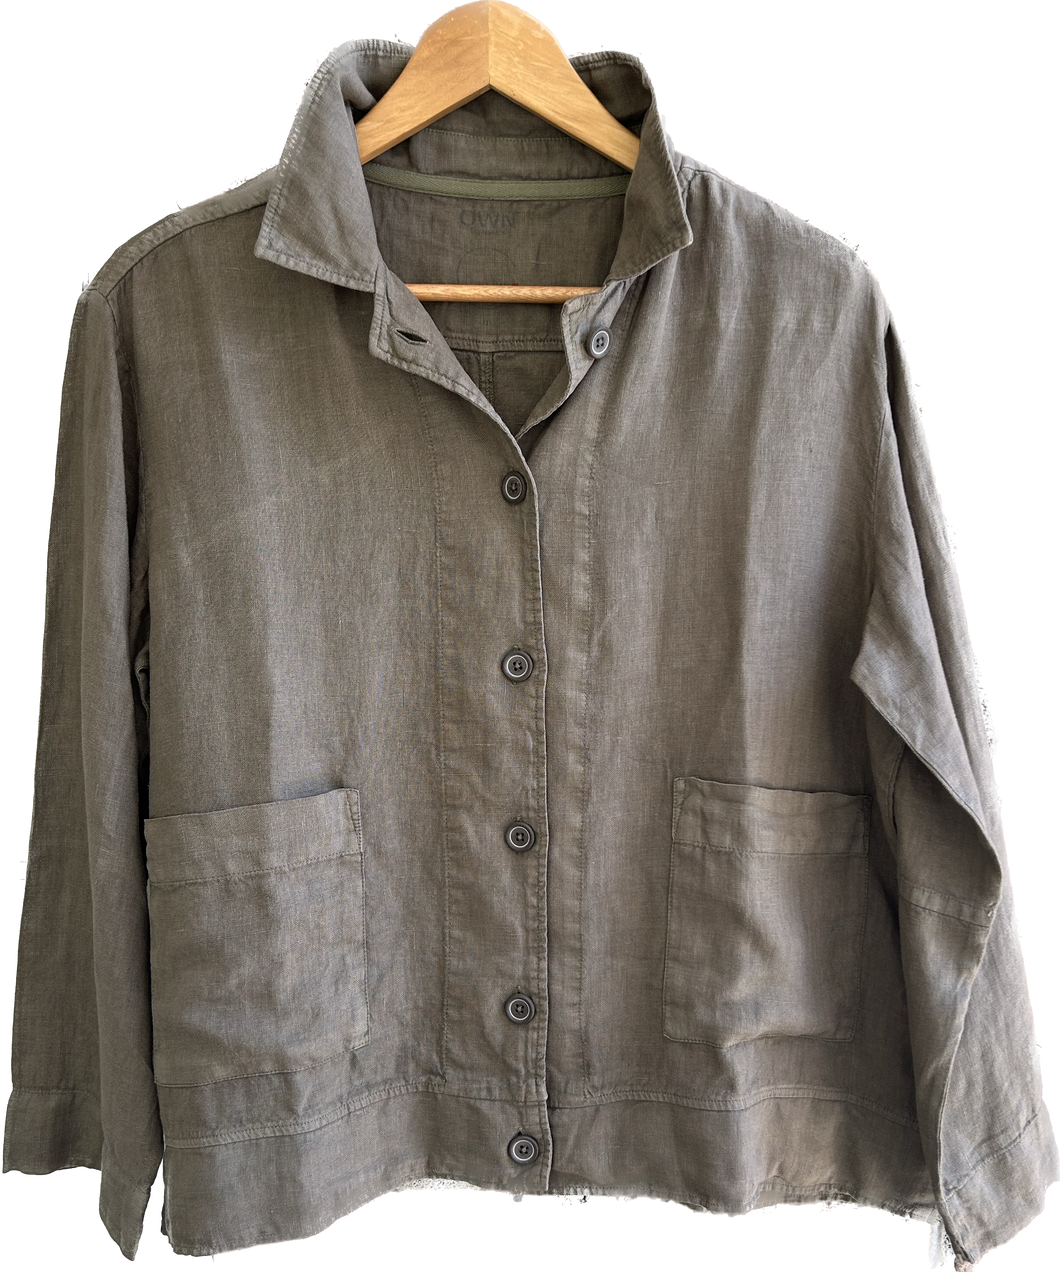 By Basics linen jacket in Capers.